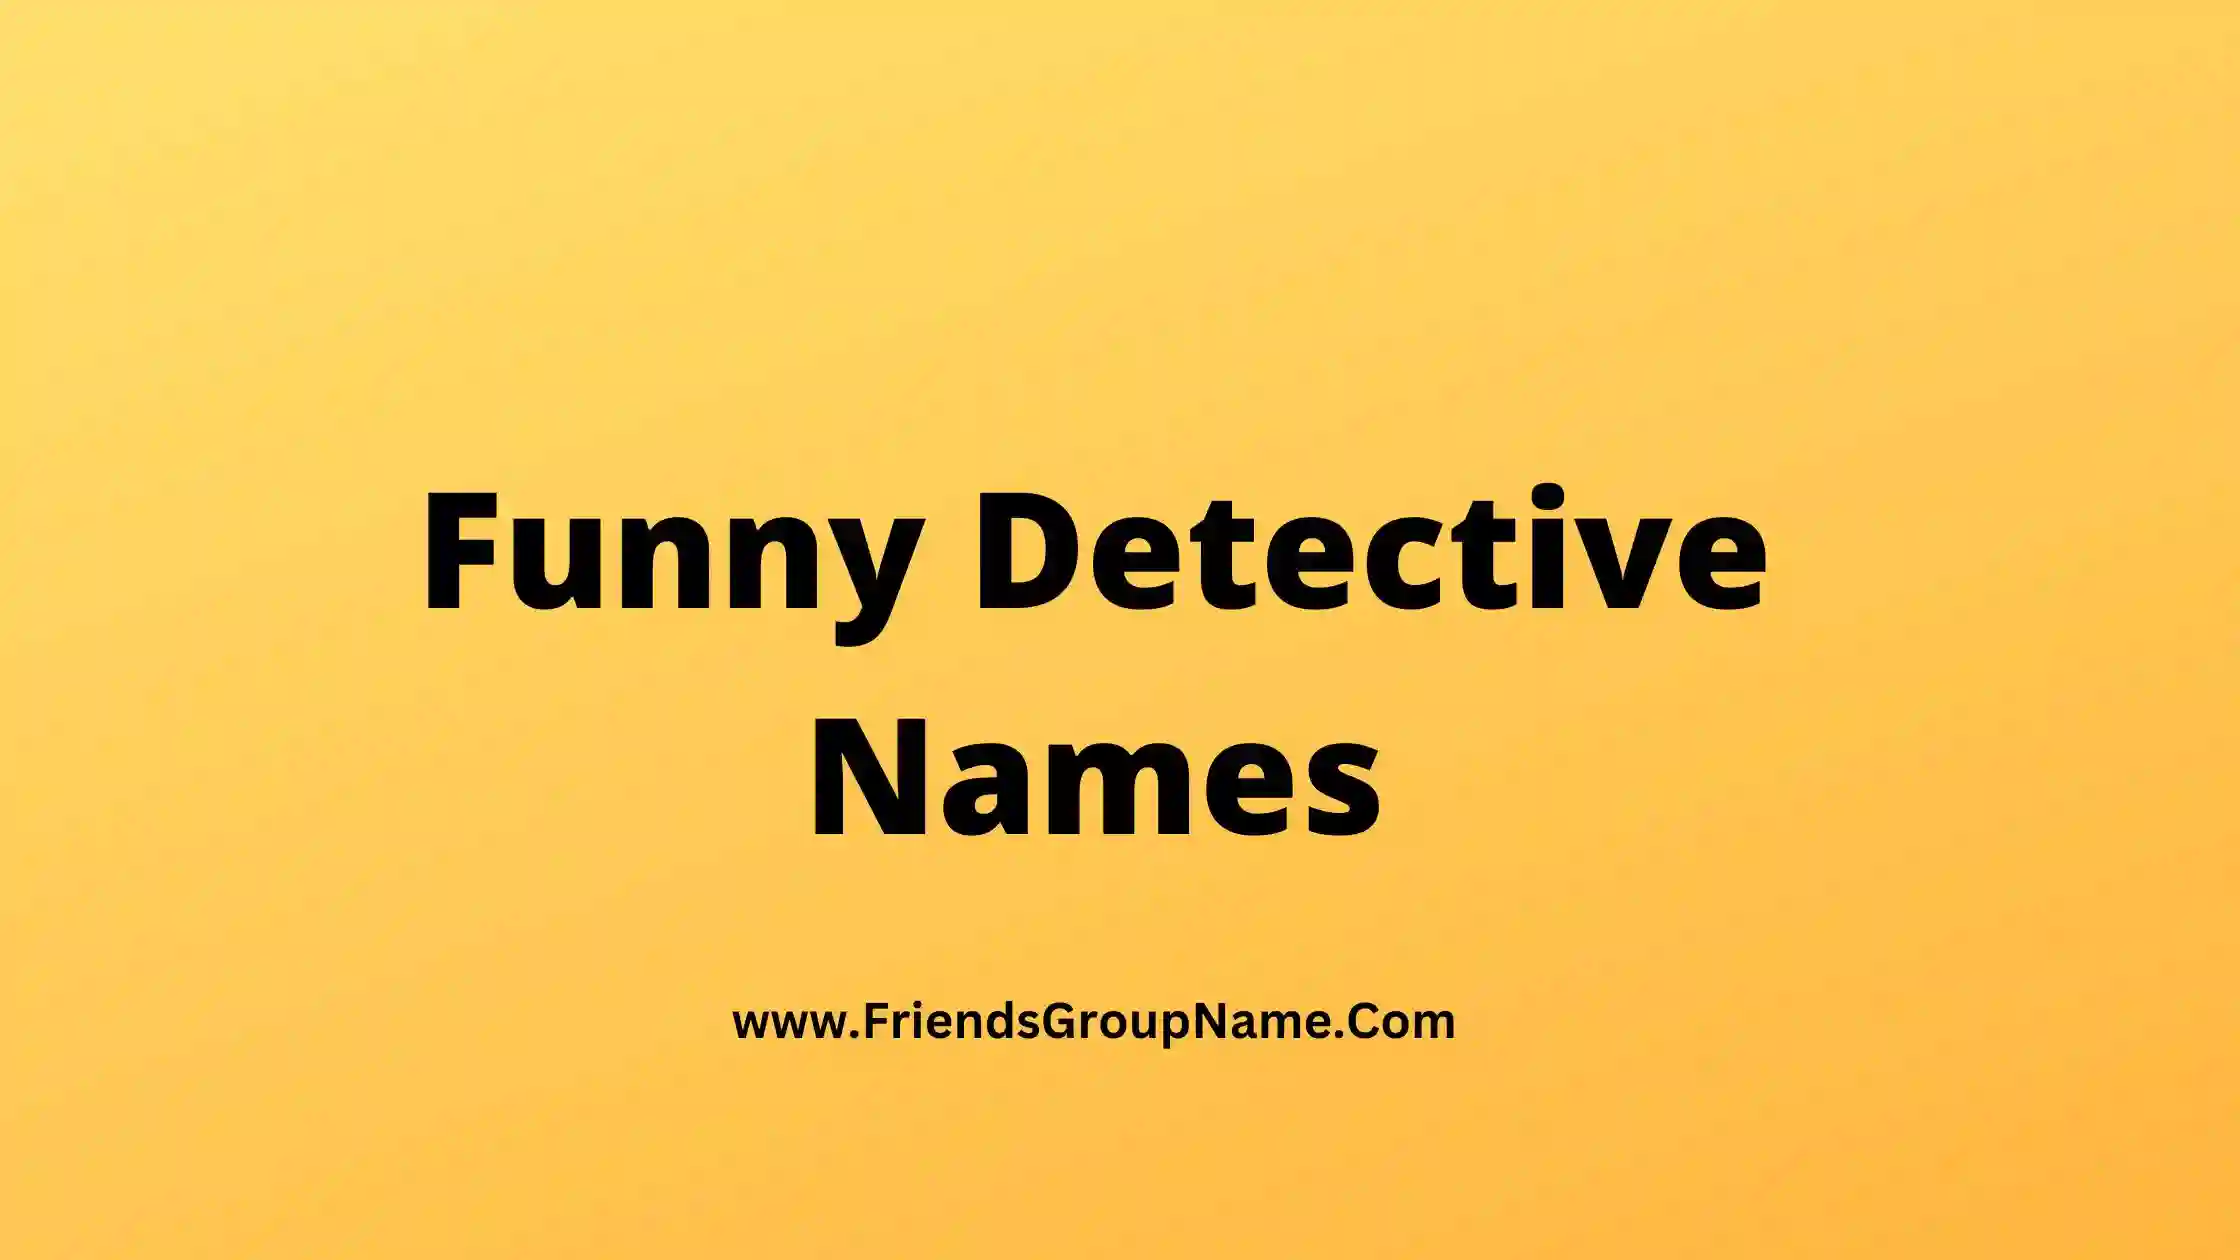 Funny Detective Names